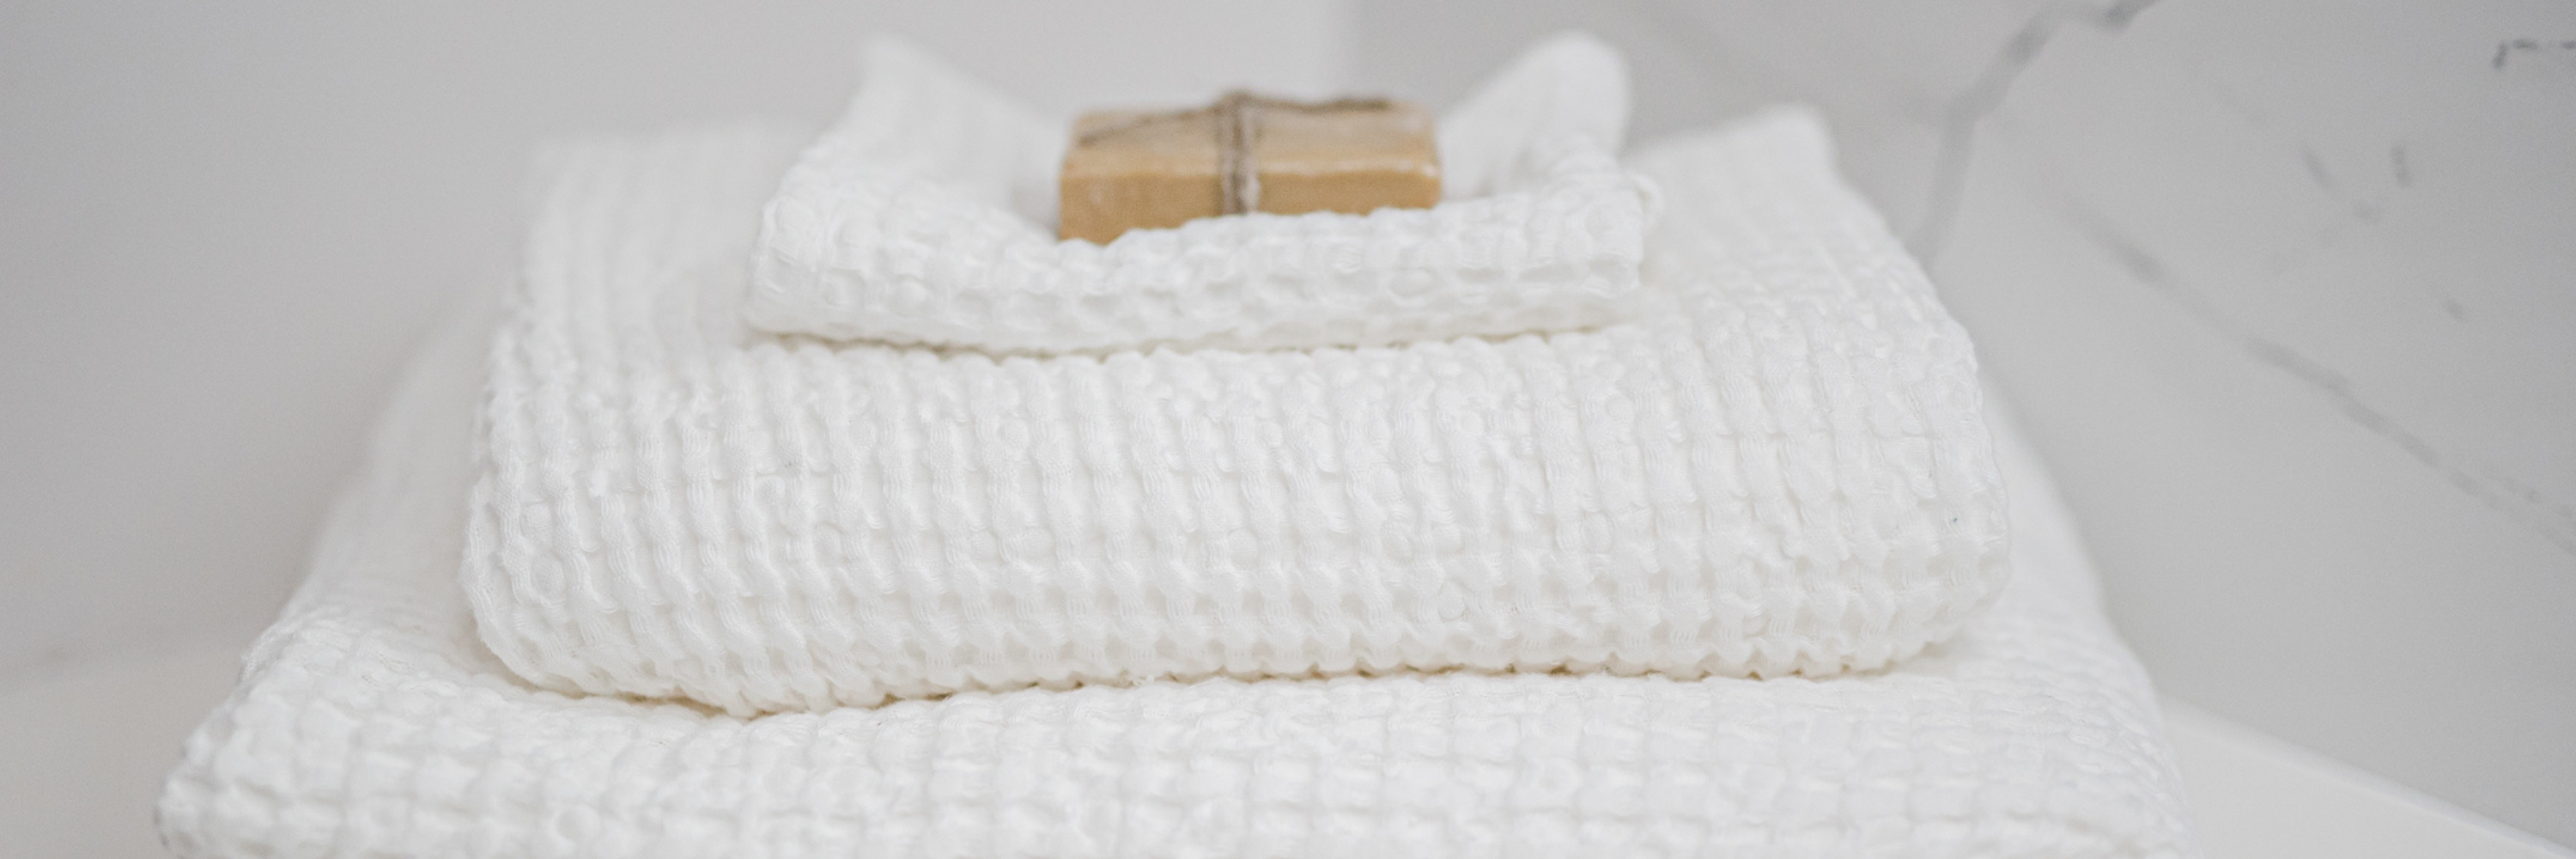 A stack of white linen bath towels in a waffle pattern